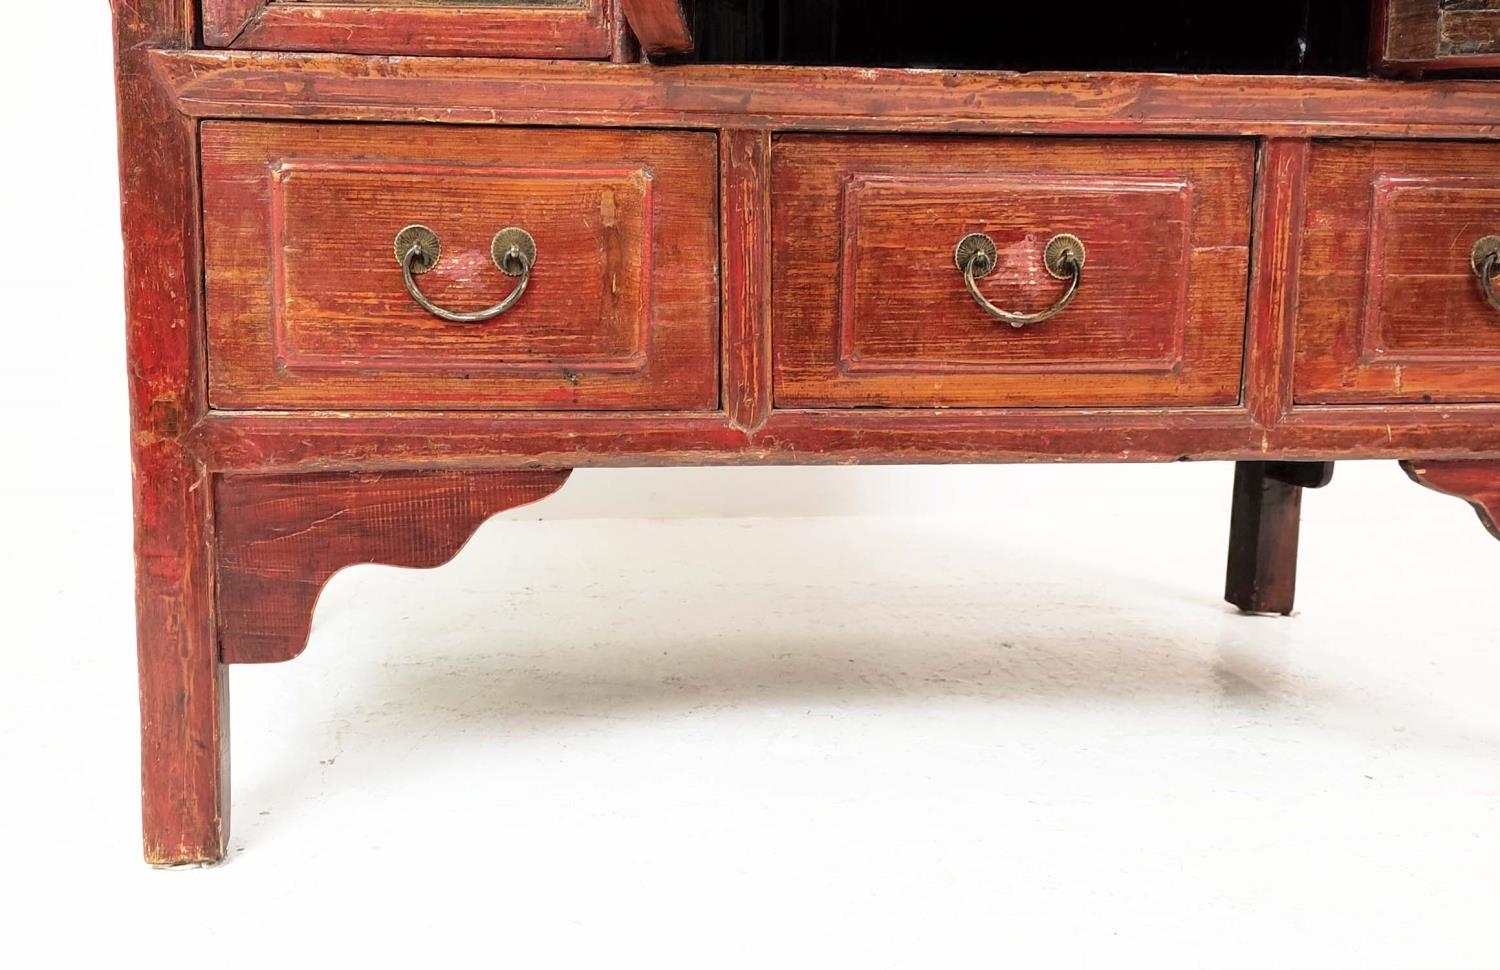 CHINESE WEDDING CABINET, in a decorative red lacquer finish depicting figural scenes and floral - Image 7 of 9